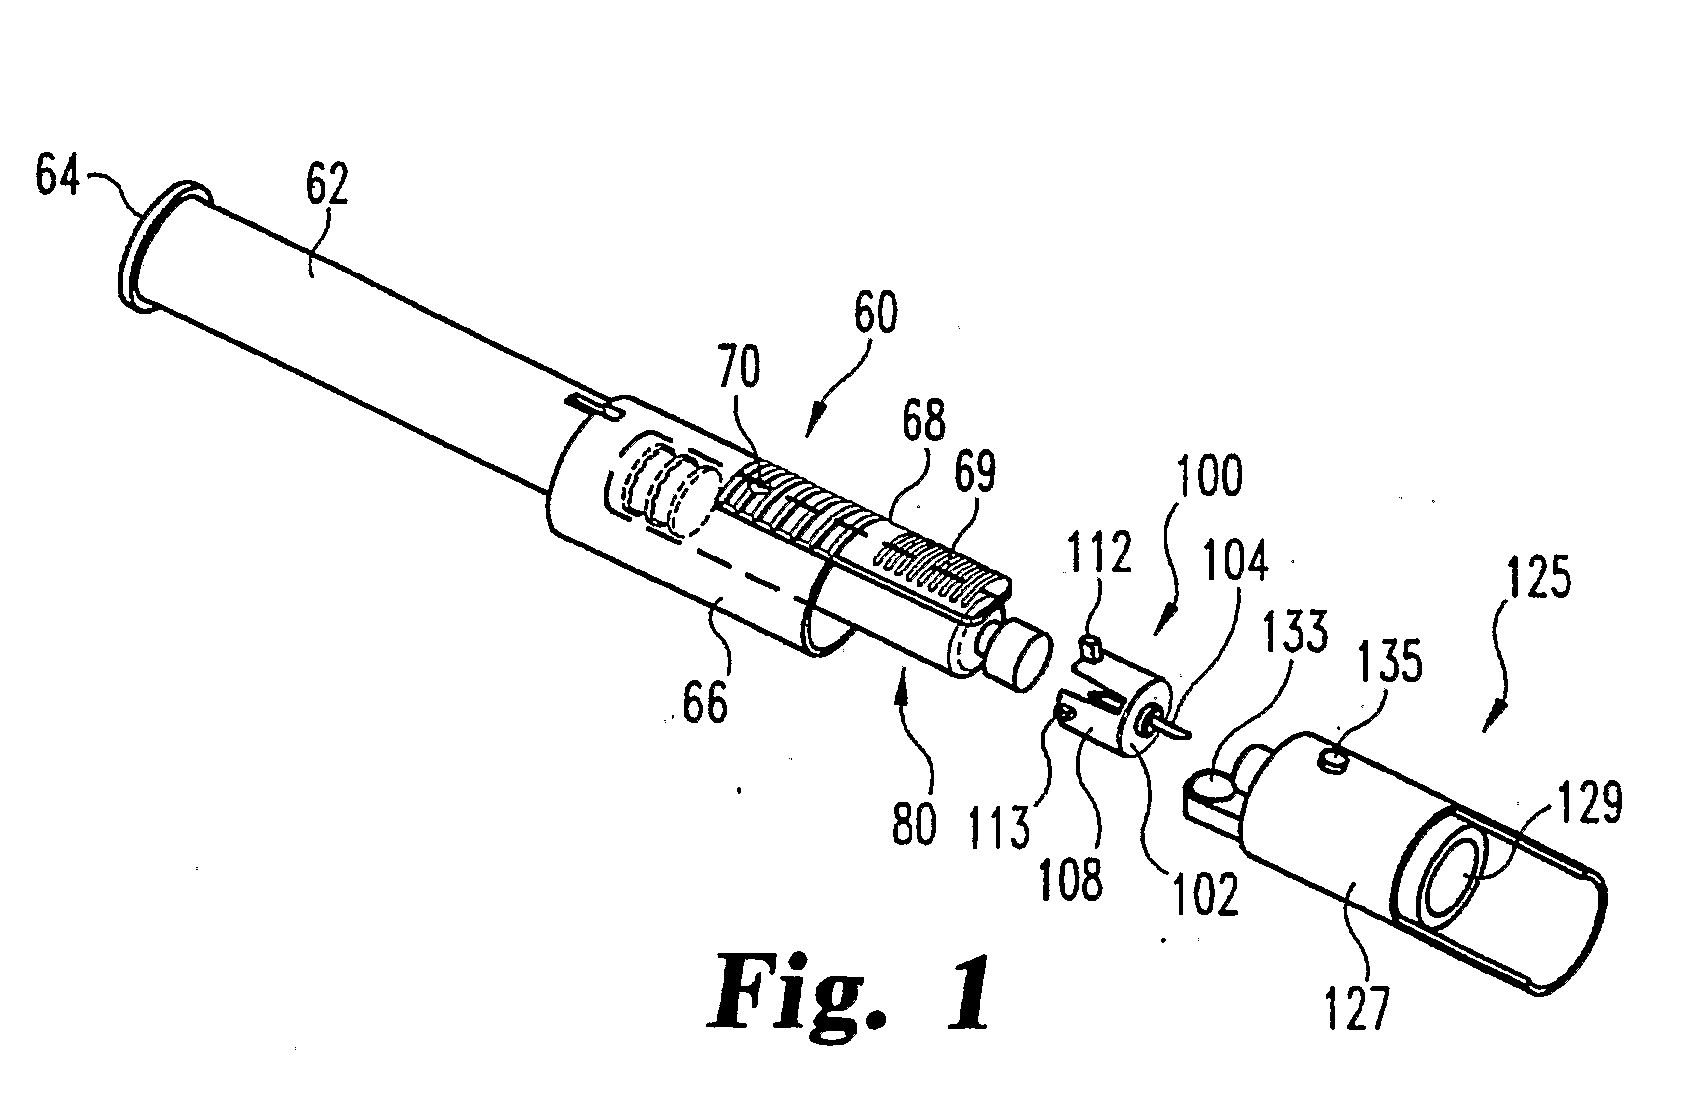 Assembly for Filling a Container of a Delivery Device with a Pharmaceutical